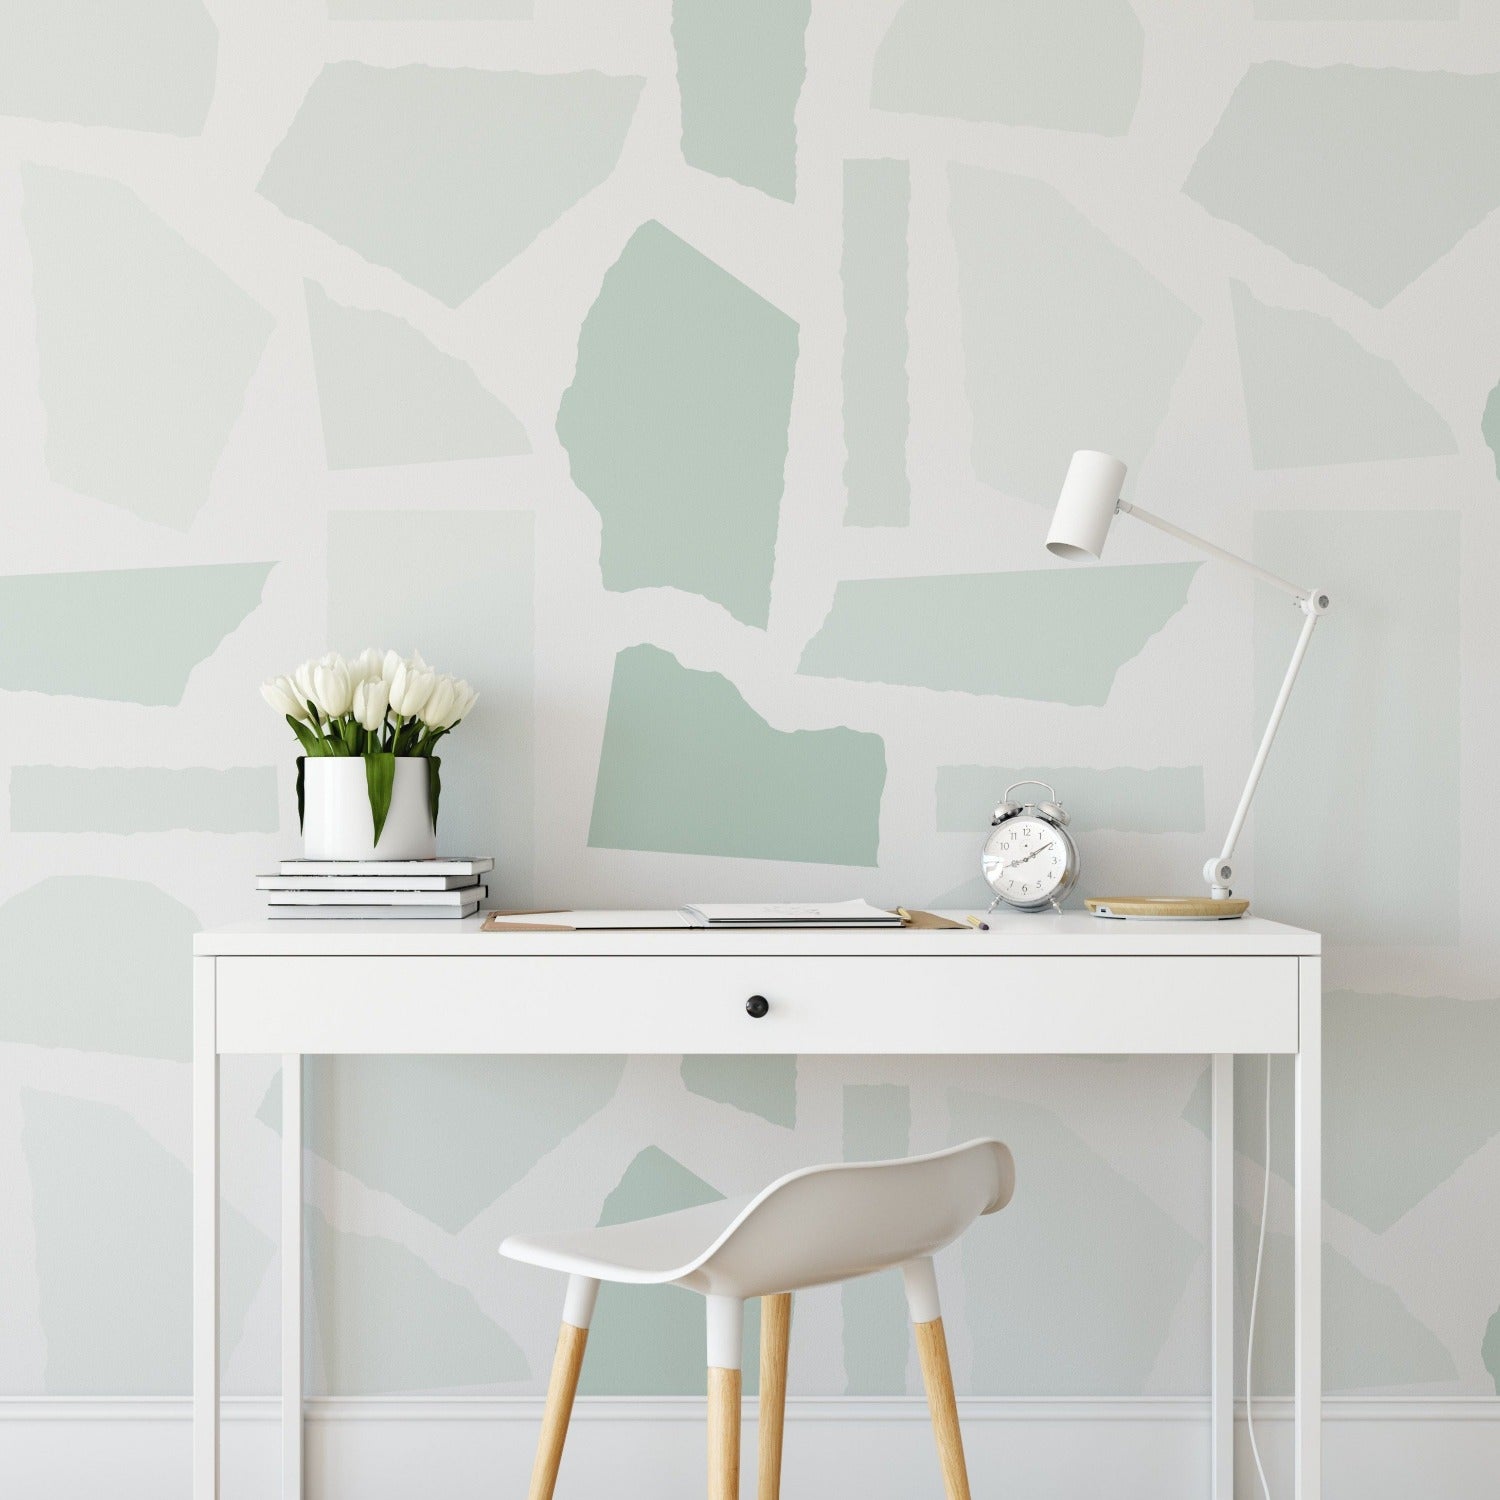 A photo of a modern office setup with a white desk and chair against a wall covered in the abstract green and white collage wallpaper. The desk is accessorized with a white table lamp, a small clock, a vase of white flowers, and a stack of books.